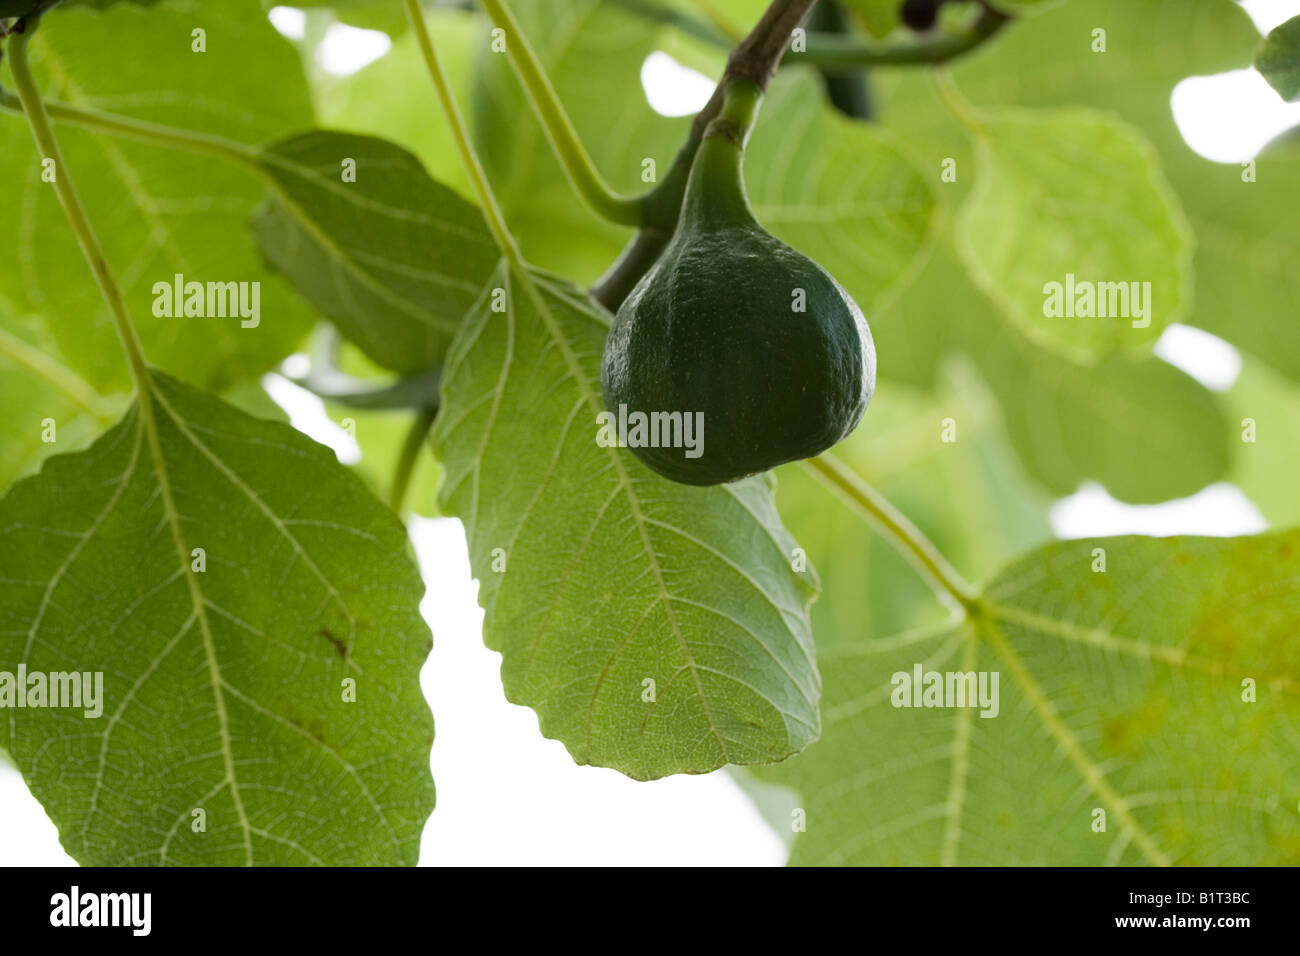 Single green fig ripening on fig tree branch close-up Stock Photo